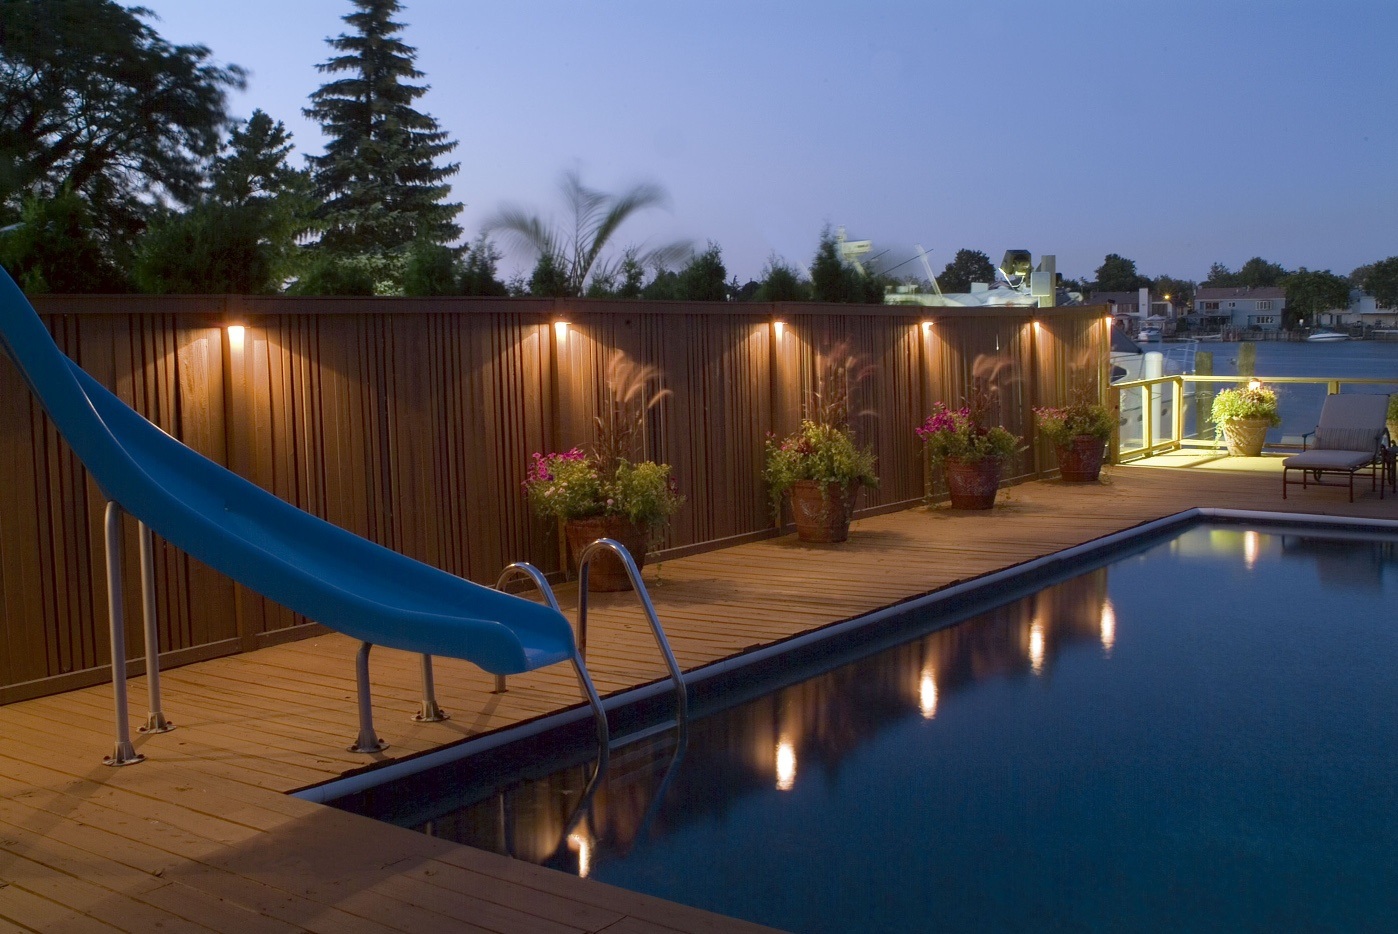 Deck and pool with lighting